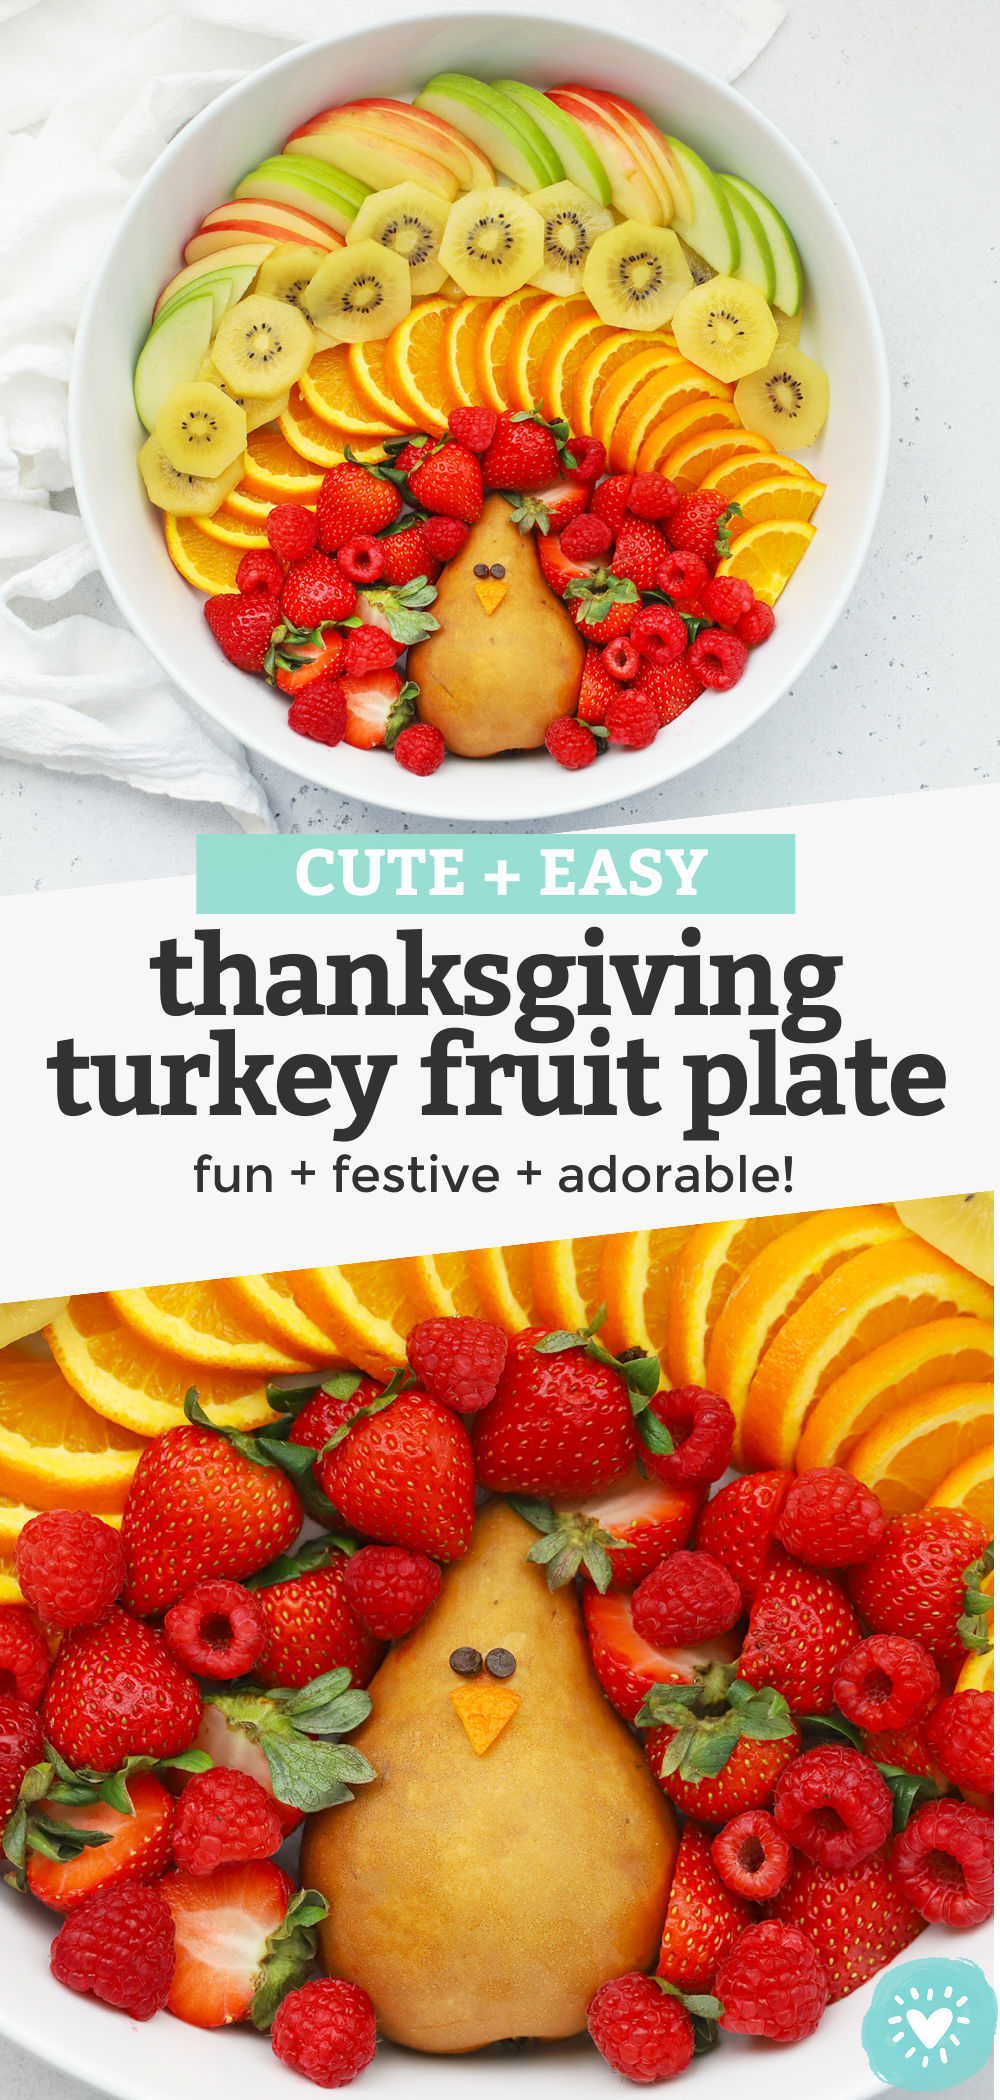 Thanksgiving Turkey Fruit Plate - This turkey-shaped Thanksgiving fruit platter looks adorable at holiday get-togethers and parties. It's a favorite with kids and grown-ups alike! (Naturally gluten-free, vegan & paleo) // Thanksgiving Appetizer // Thanksgiving Snack // Thanksgiving Fruit Platter // Turkey Fruit Platter // Fall Appetizer //